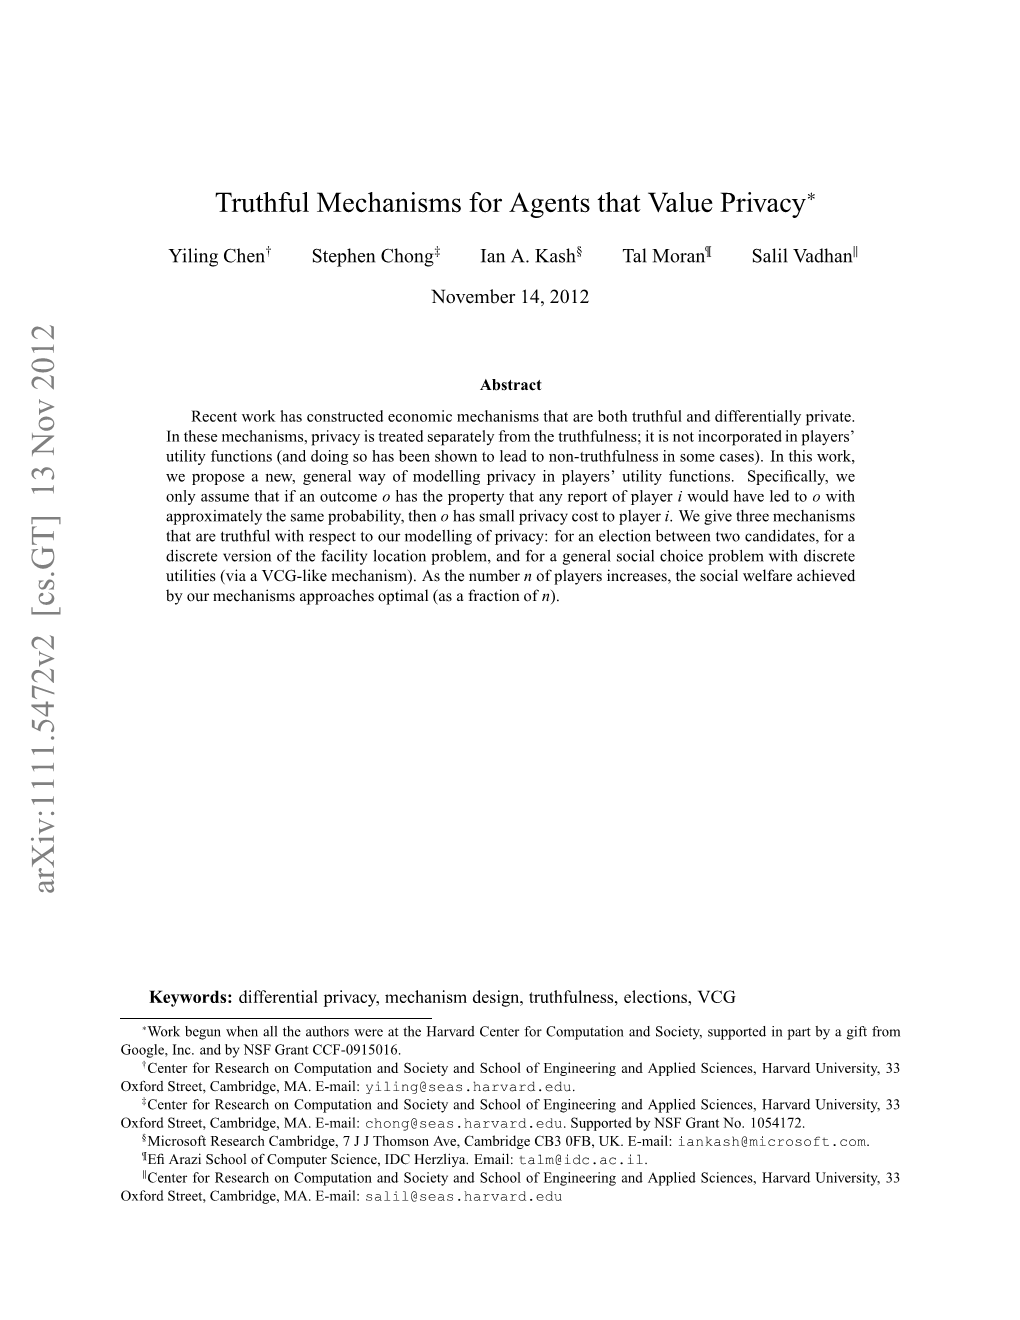 Truthful Mechanisms for Agents That Value Privacy